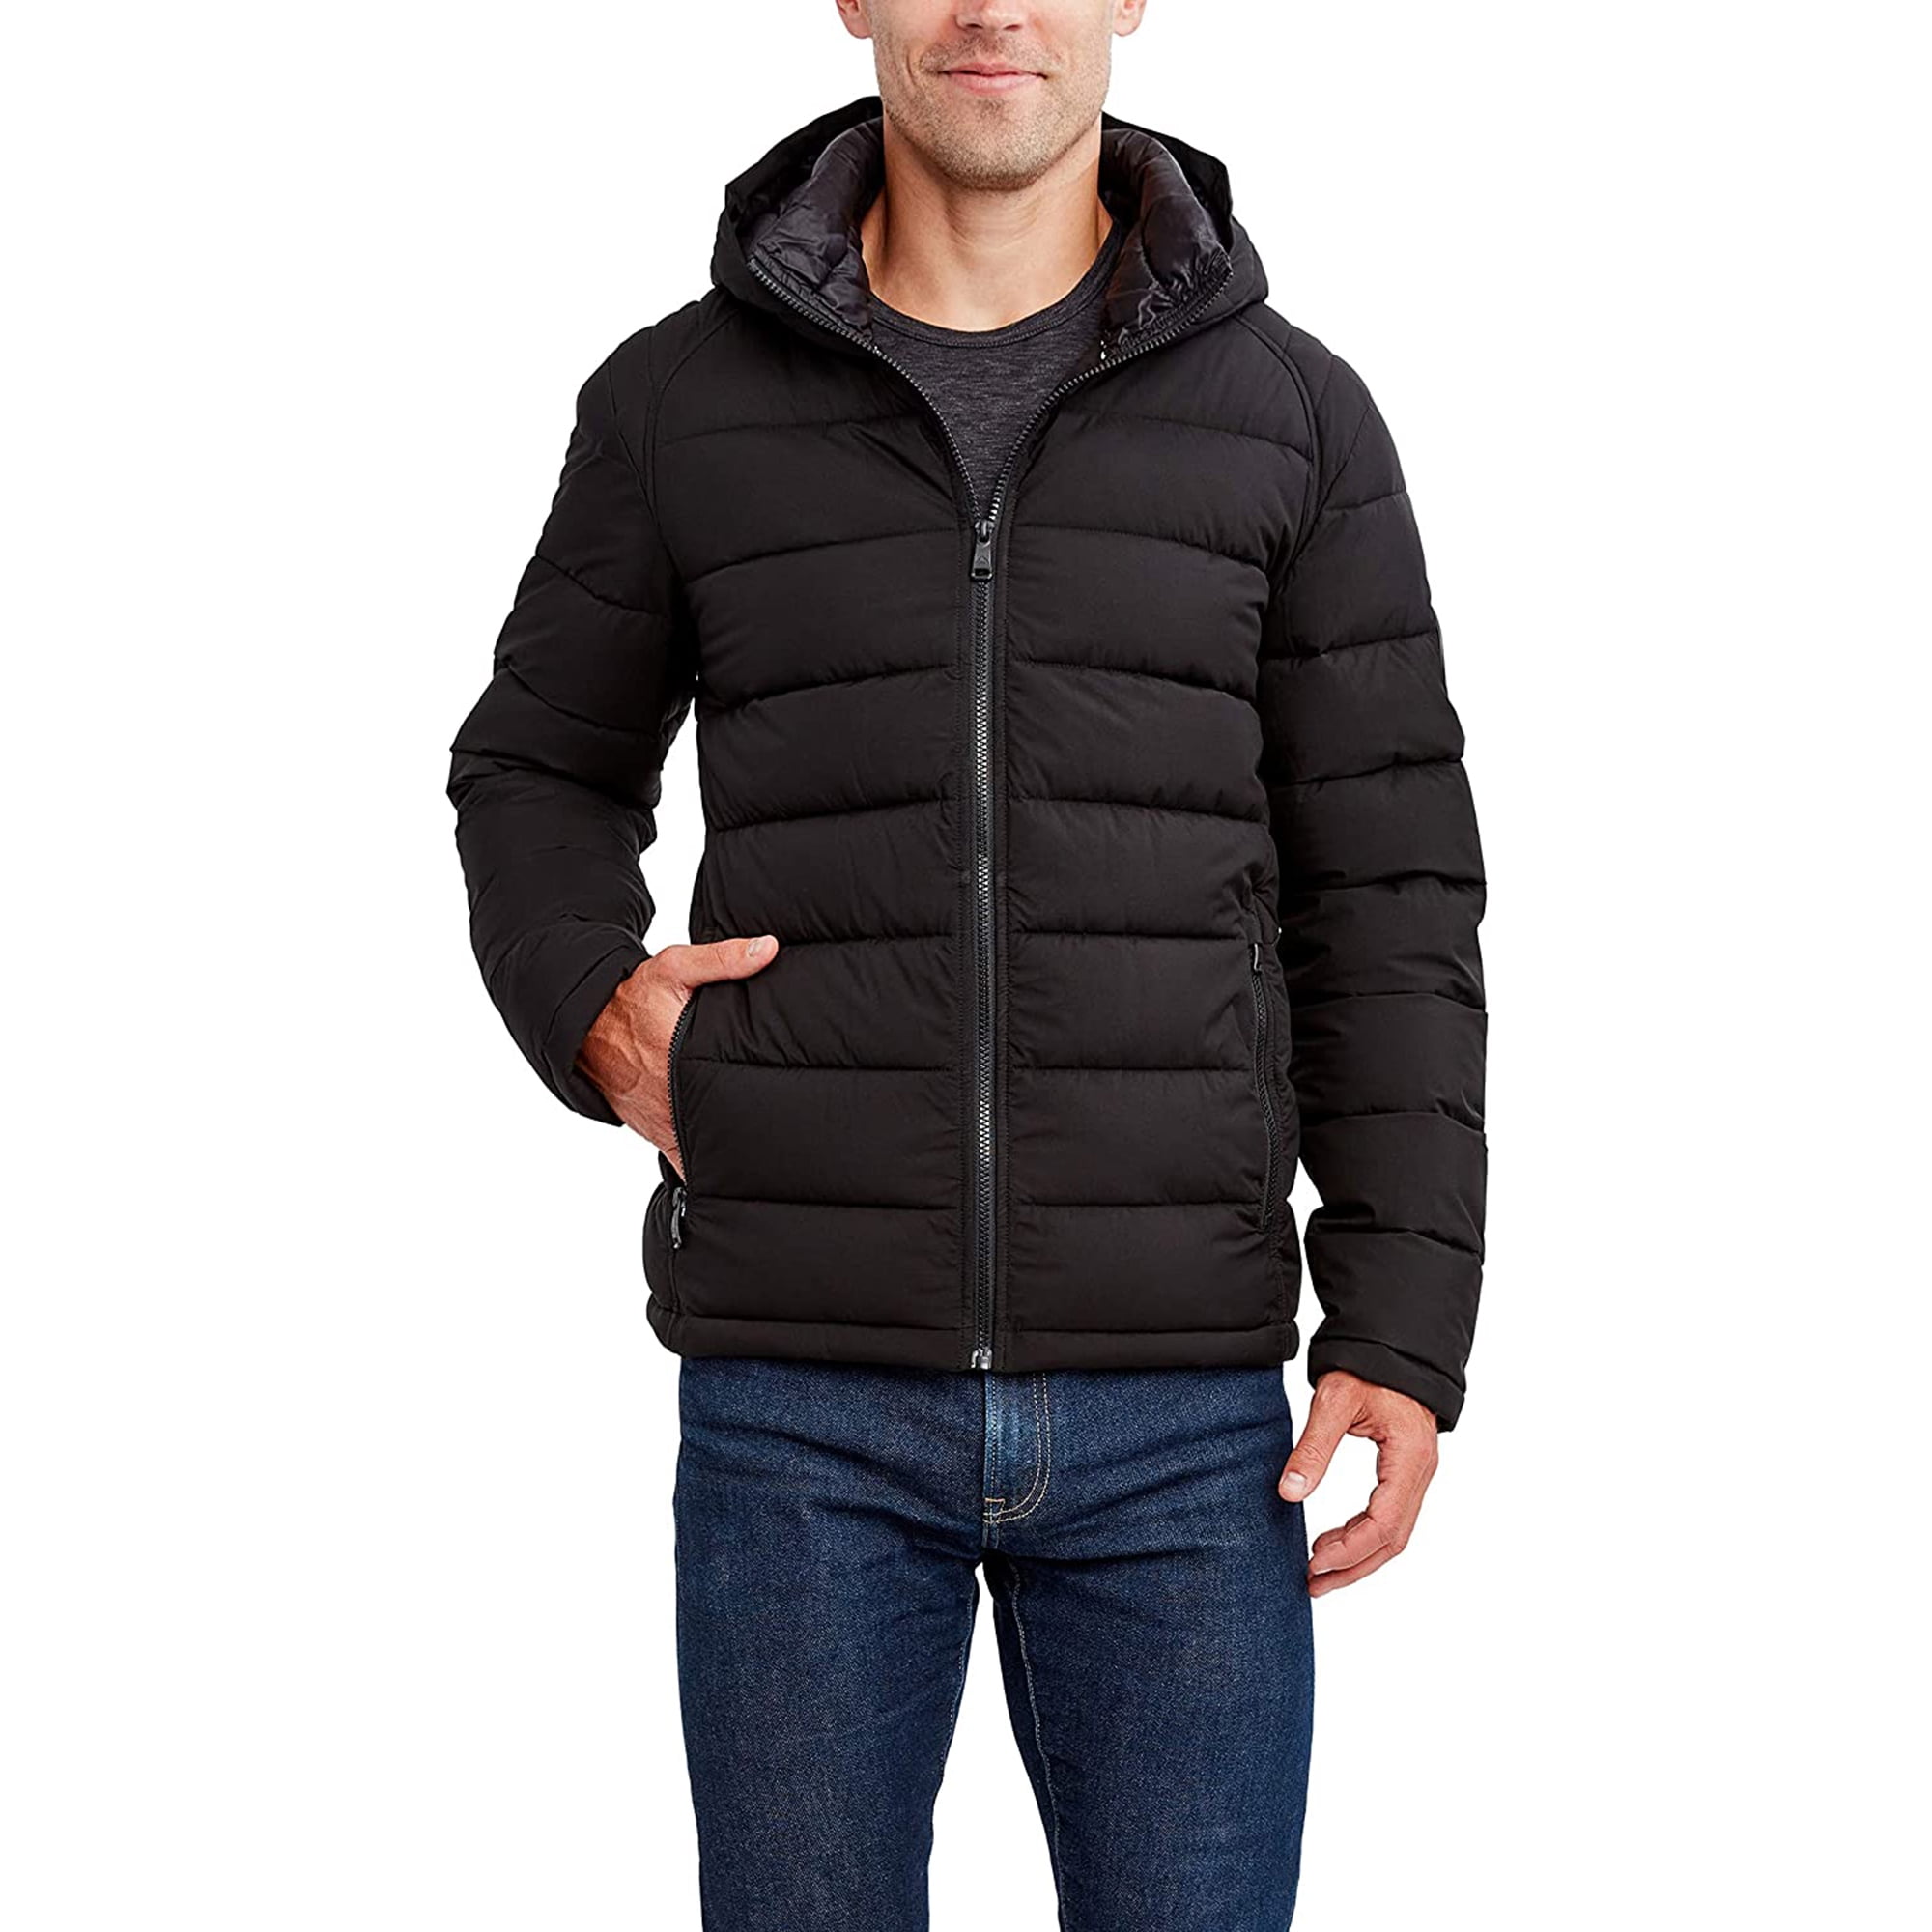 HFX Men's Lightweight Puffer Jacket with Hood, Water and Wind Resistant ...